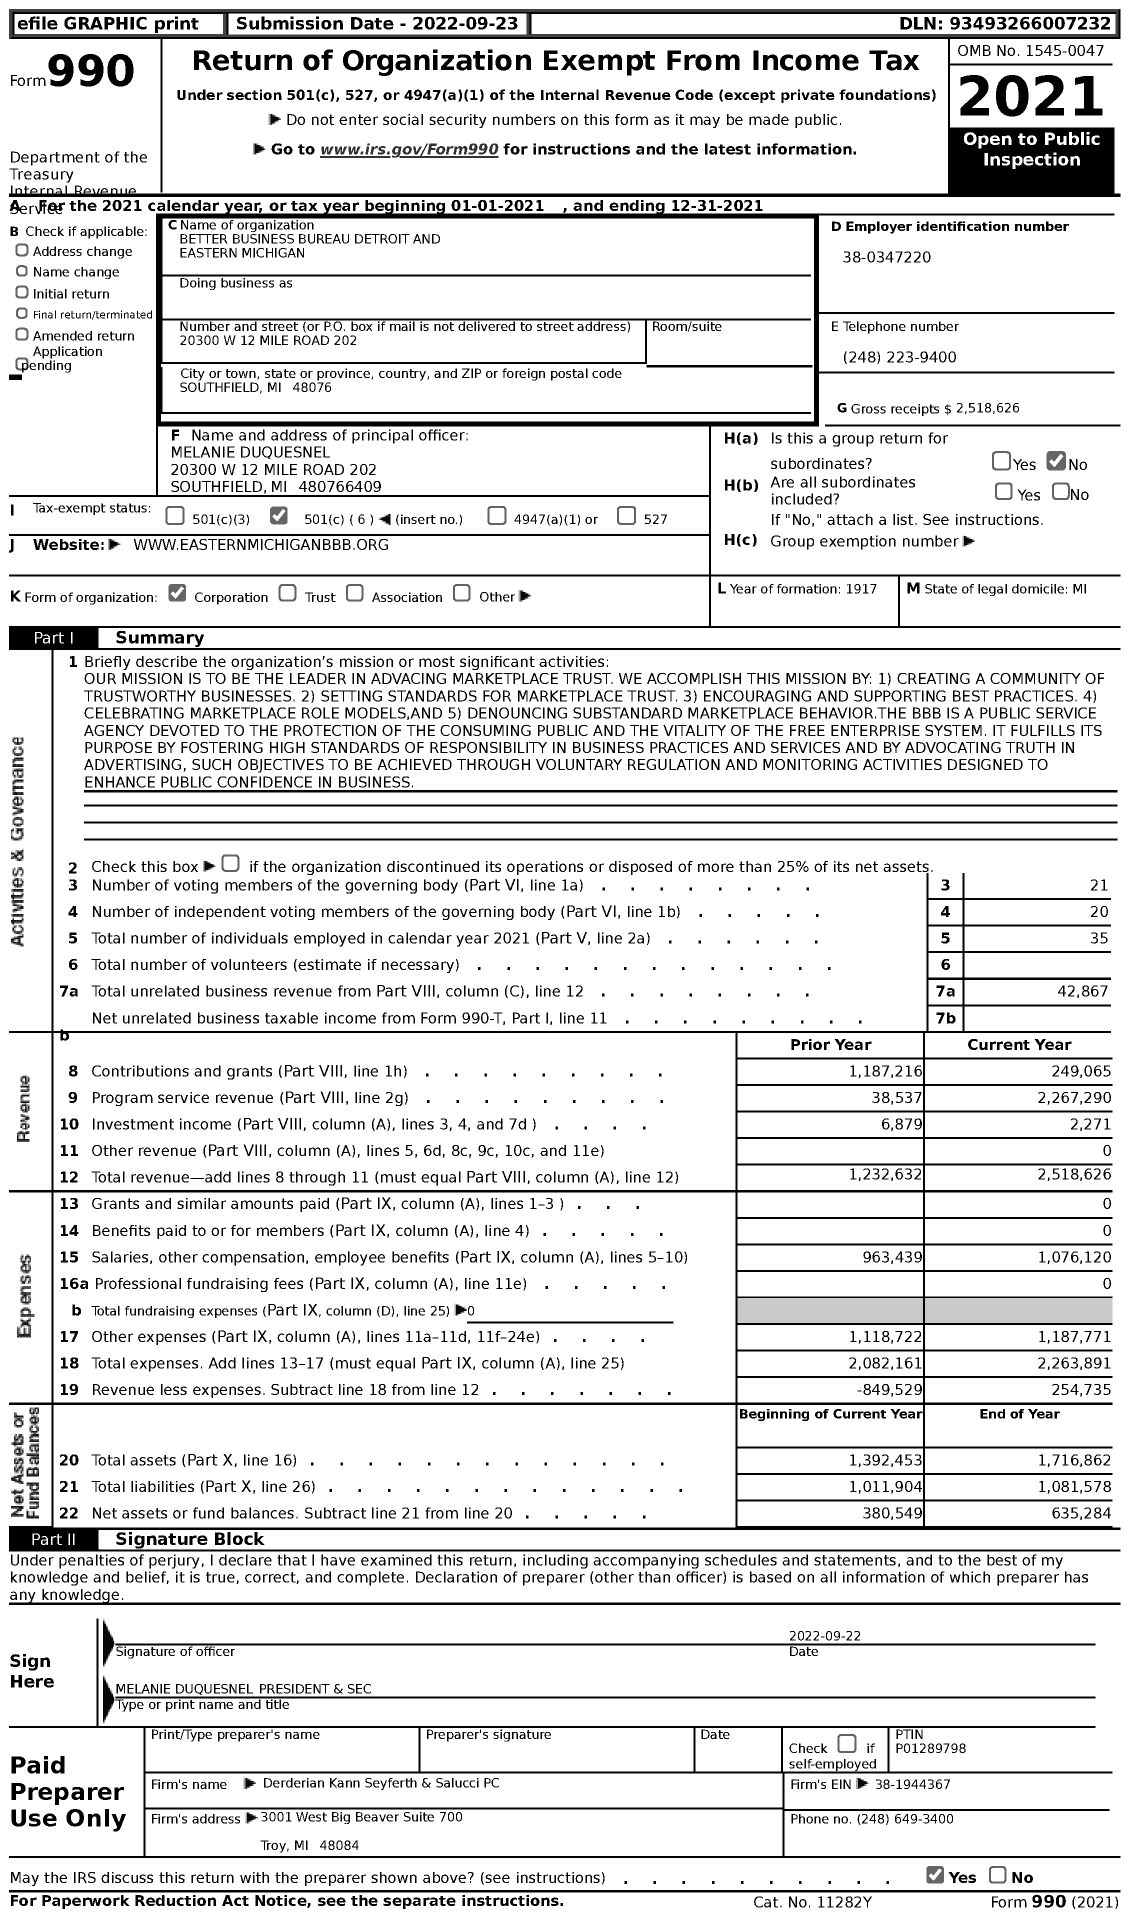 Image of first page of 2021 Form 990 for Better Business Bureau Detroit and Eastern Michigan (BBB)